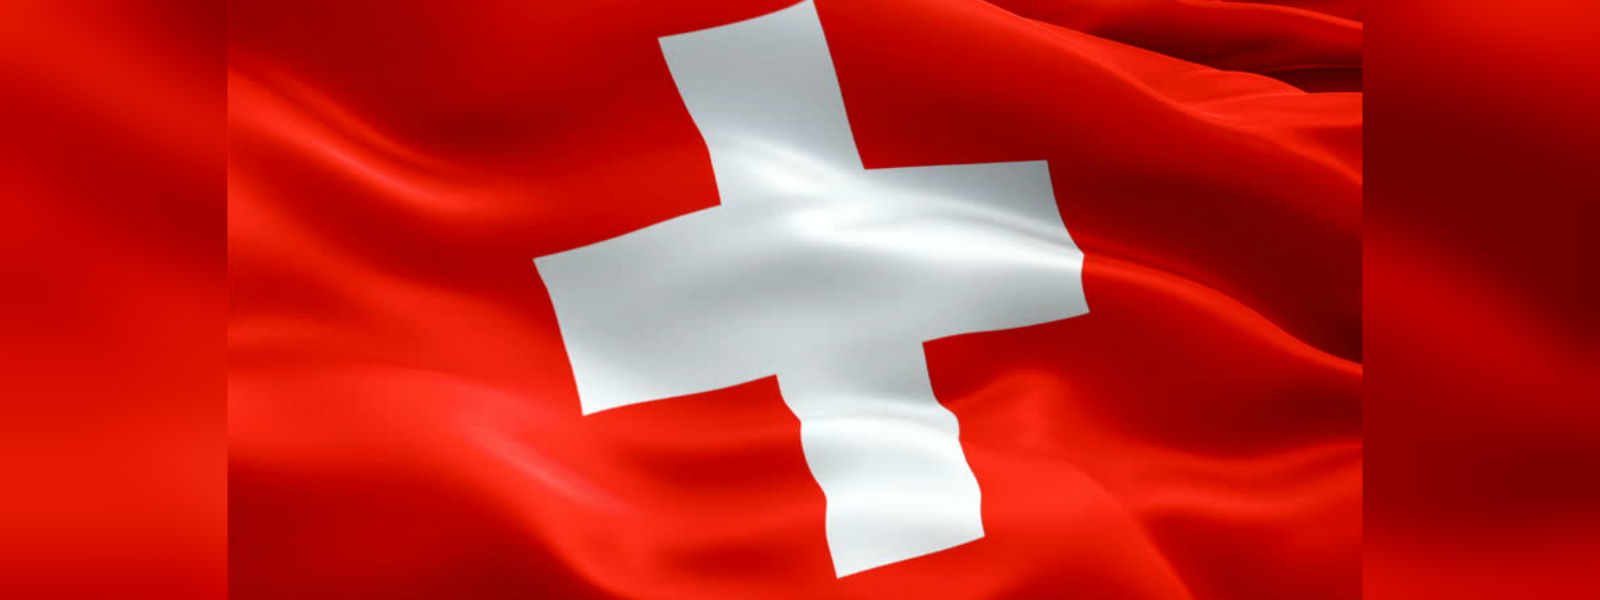 Swiss Embassy staffer to be arrested